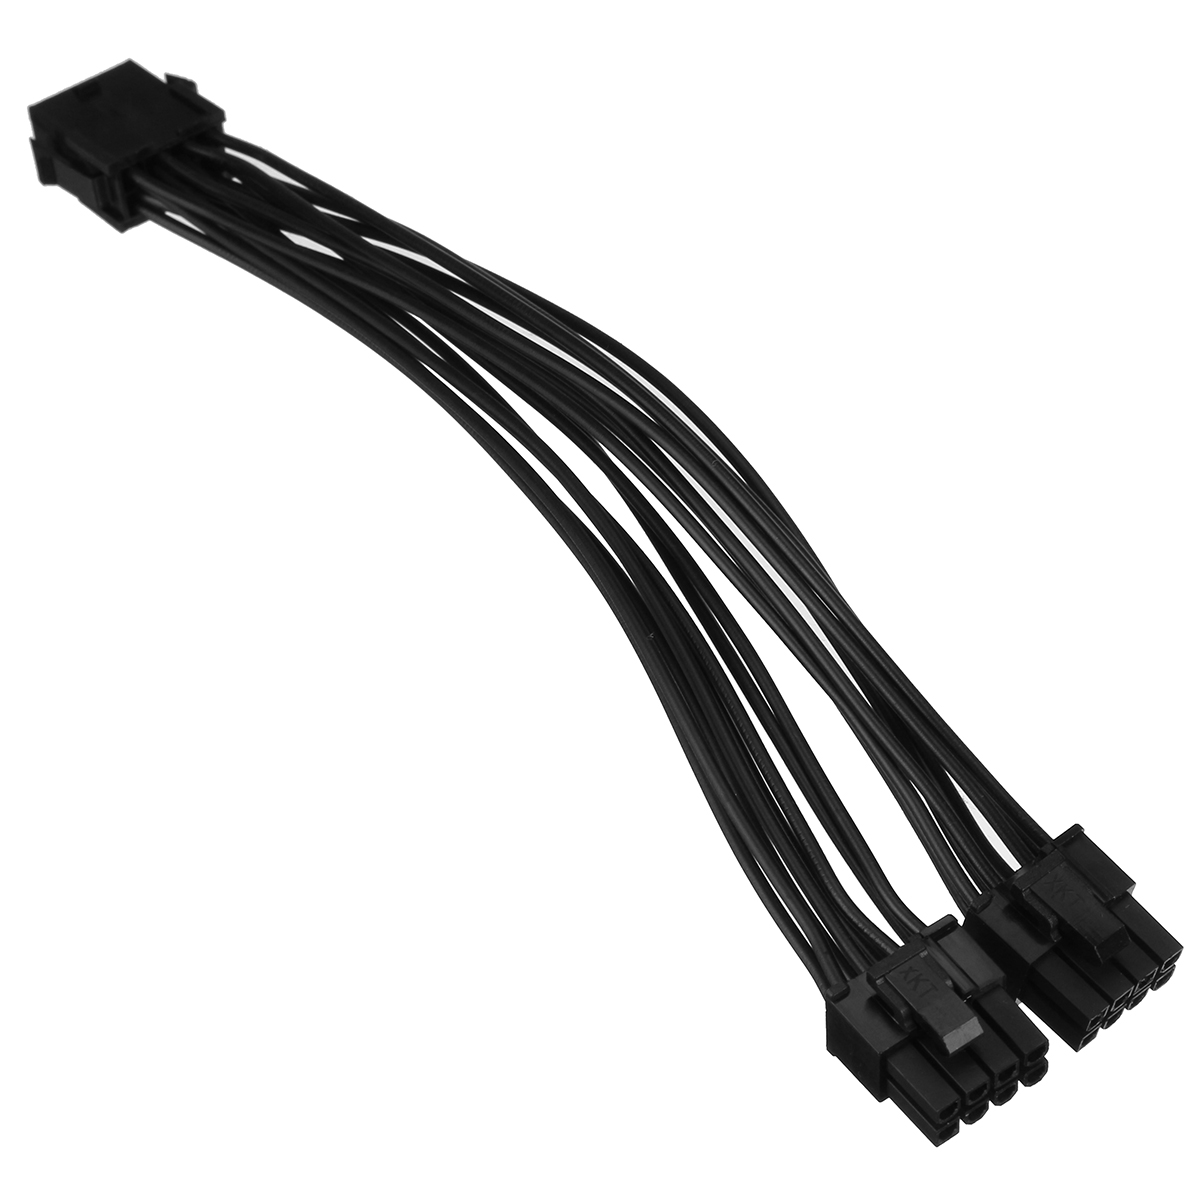 Find 20cm Graphics Card 8 Pin Female to 2 8P 6 2 pin Extention Power Cable Male for Sale on Gipsybee.com with cryptocurrencies